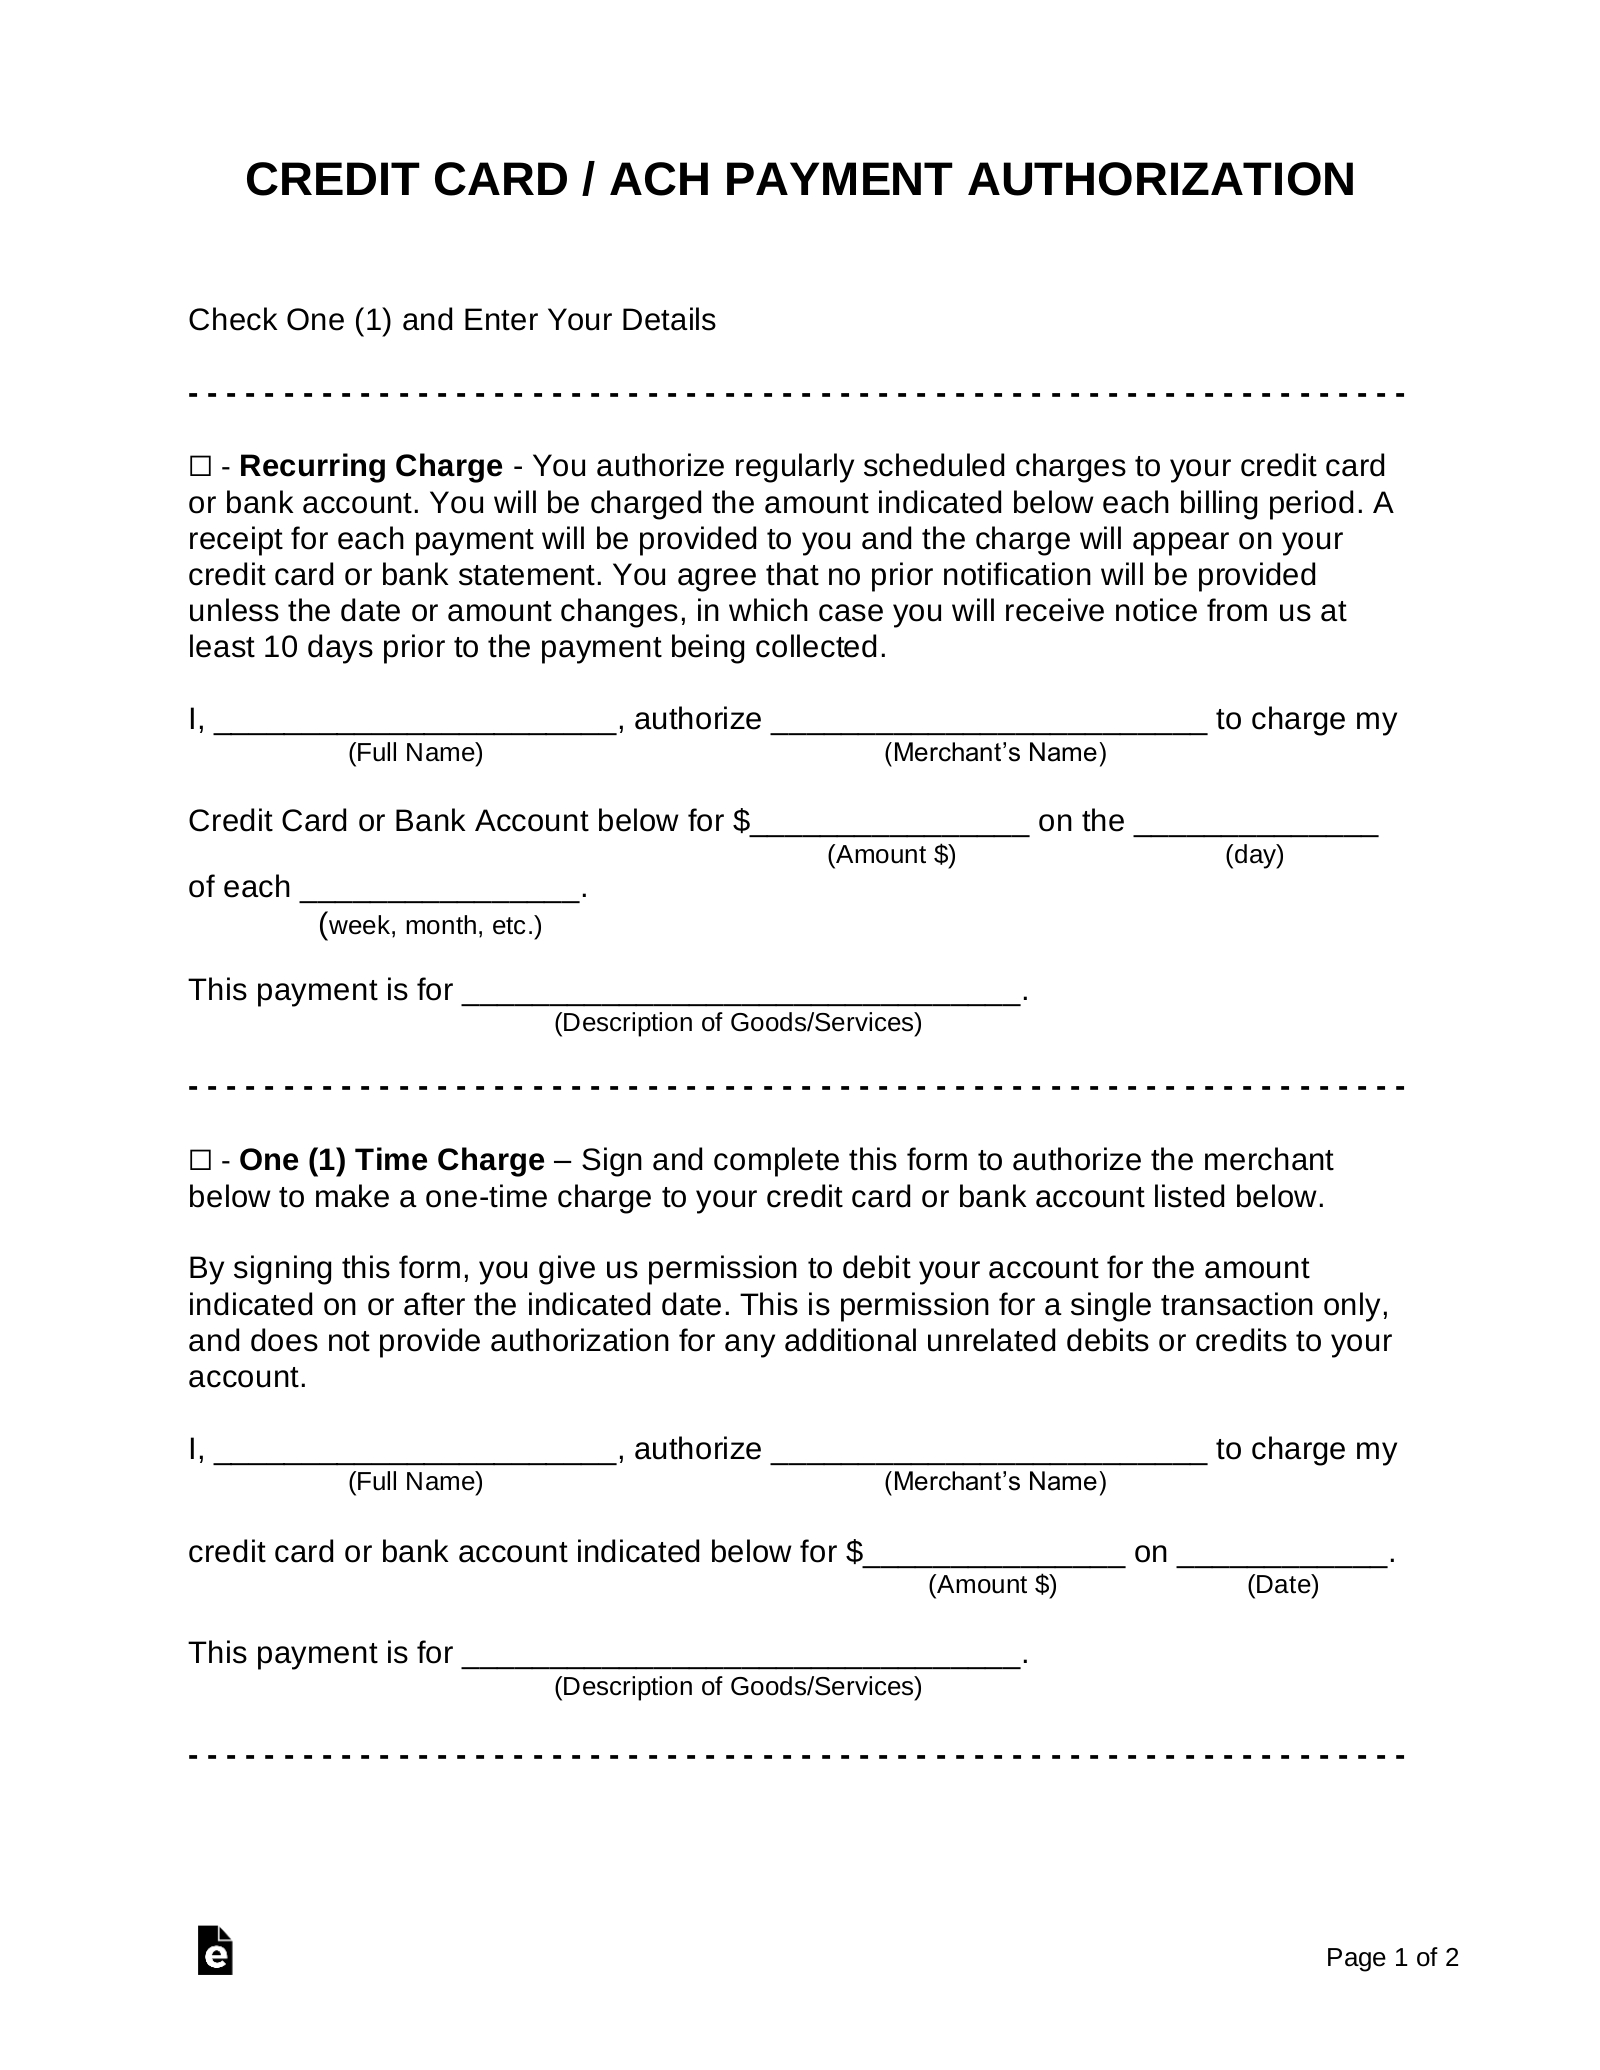 Free Credit Card (Ach) Authorization Forms – Pdf | Word With Regard To Credit Card Authorization Form Template Word